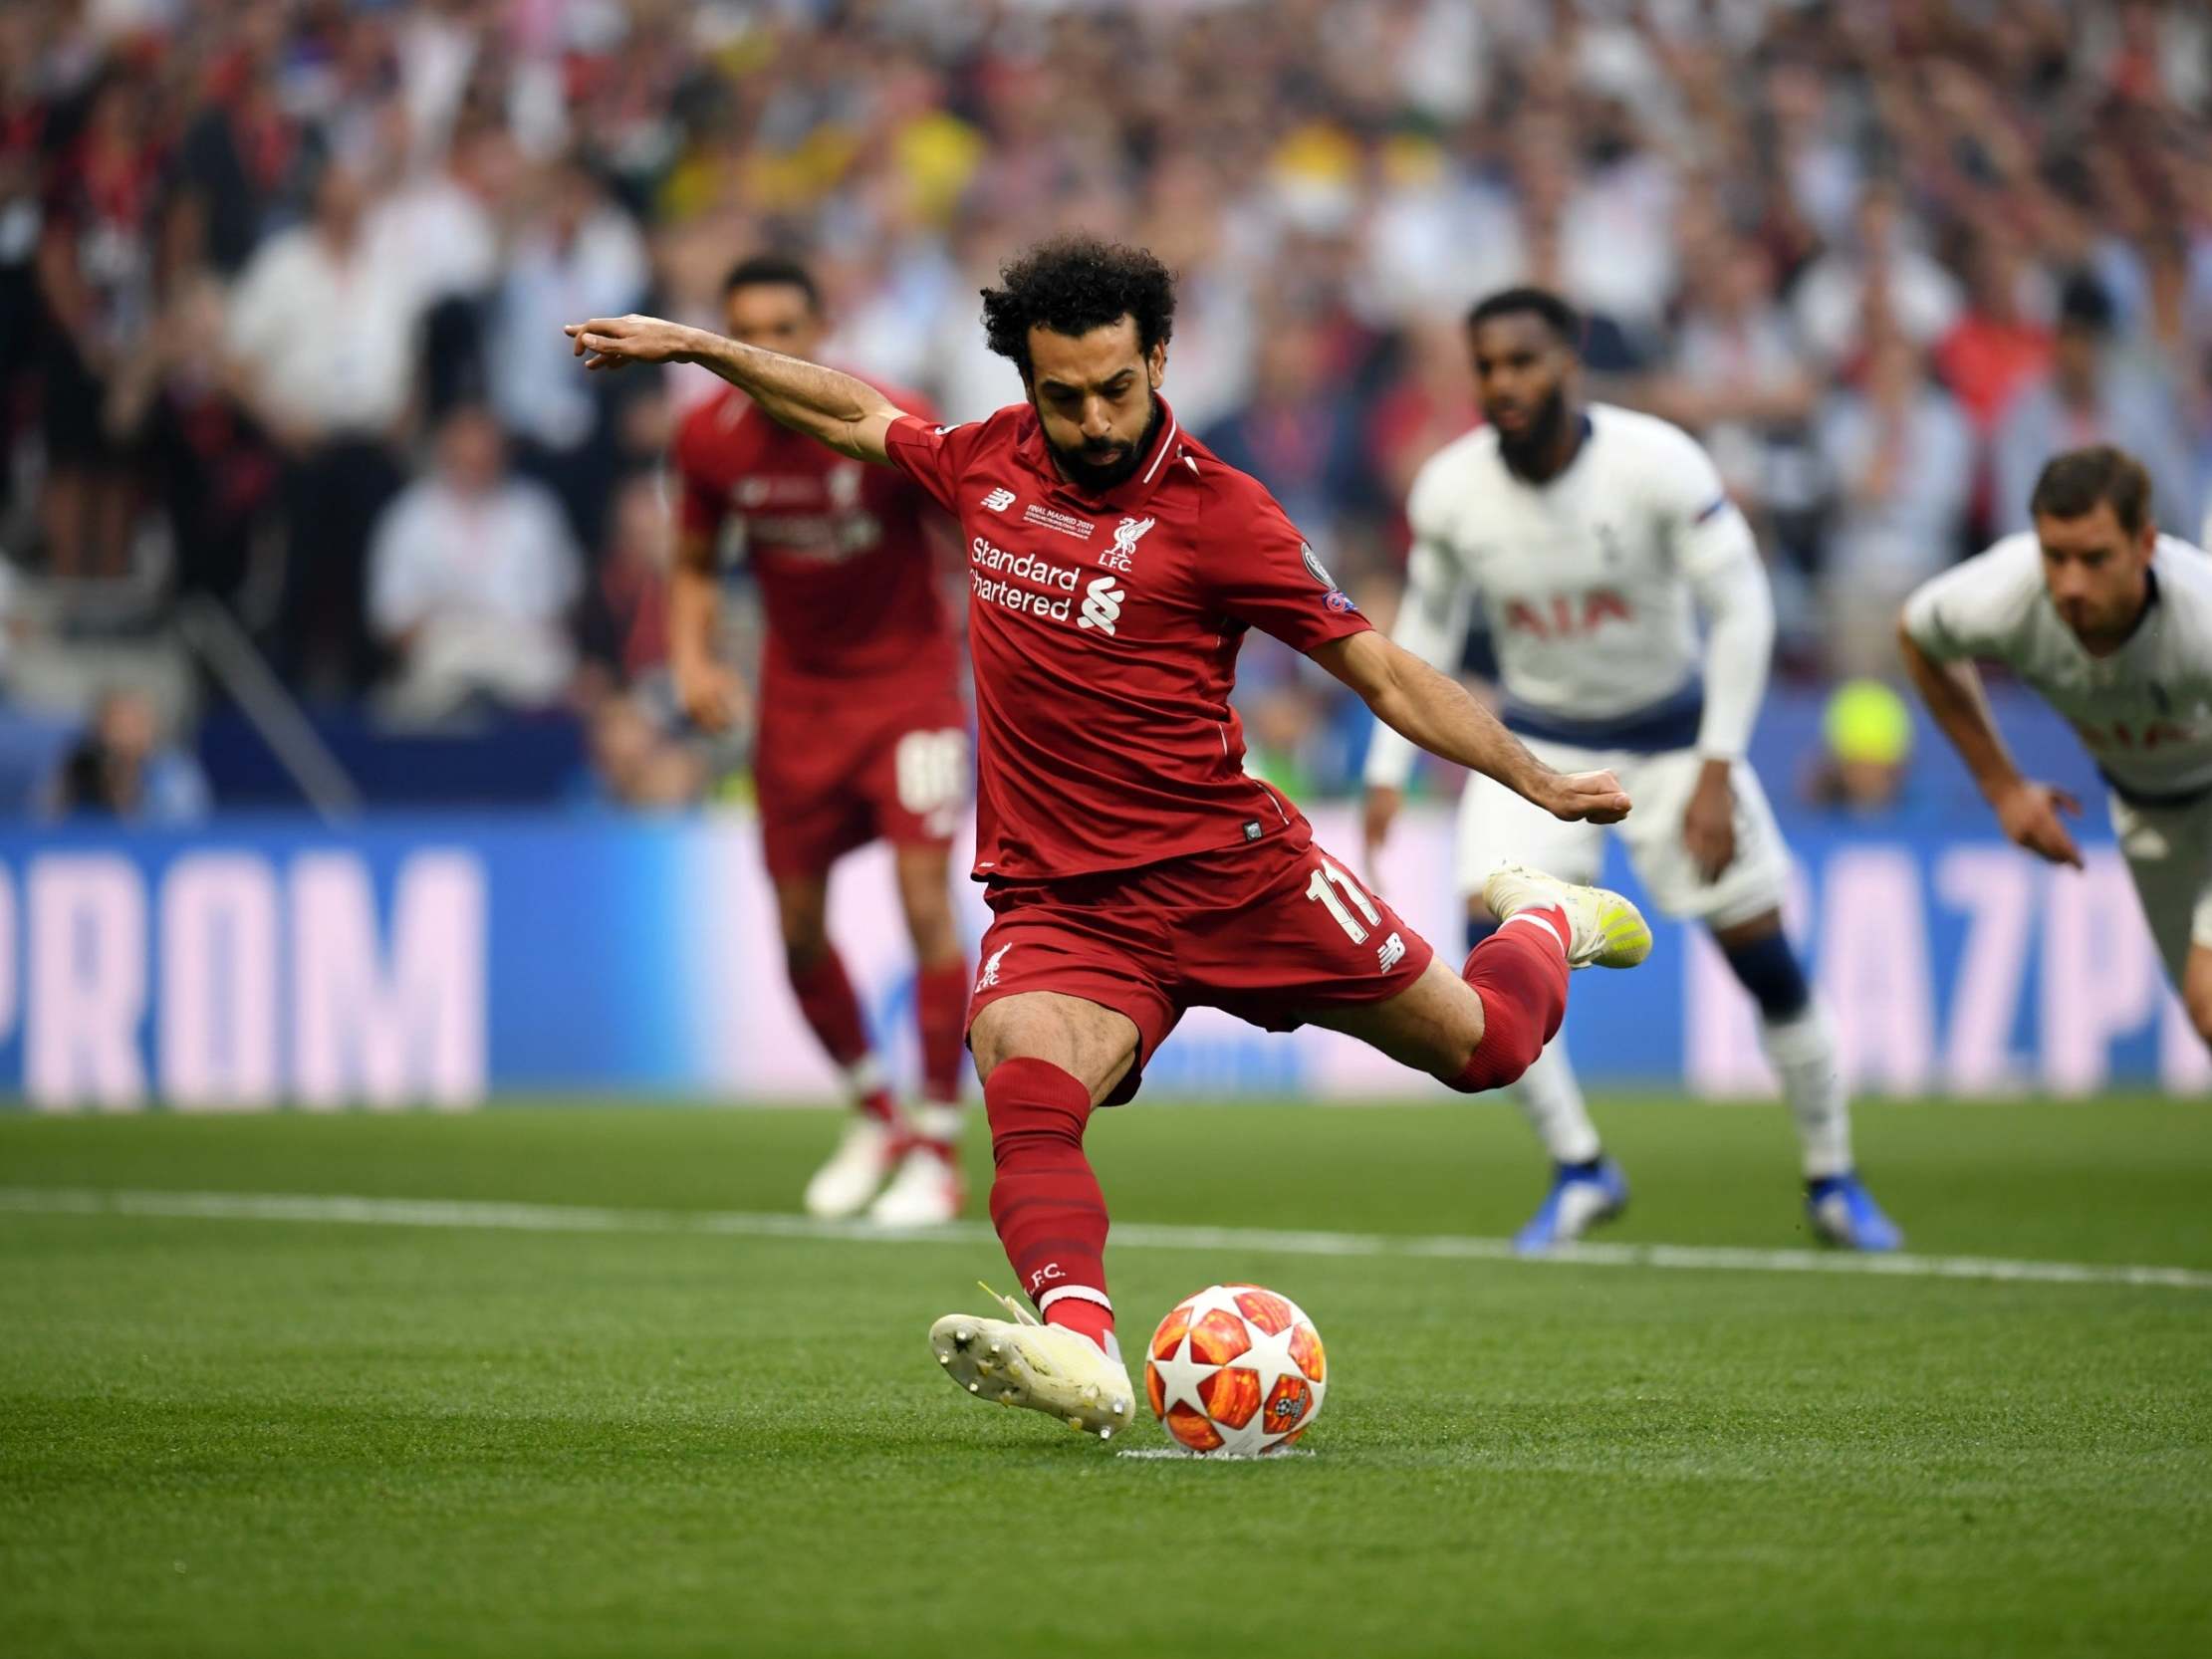 Mohamed Salah goal: Moussa Sissoko handball gifts Liverpool instant penalty in Champions League final